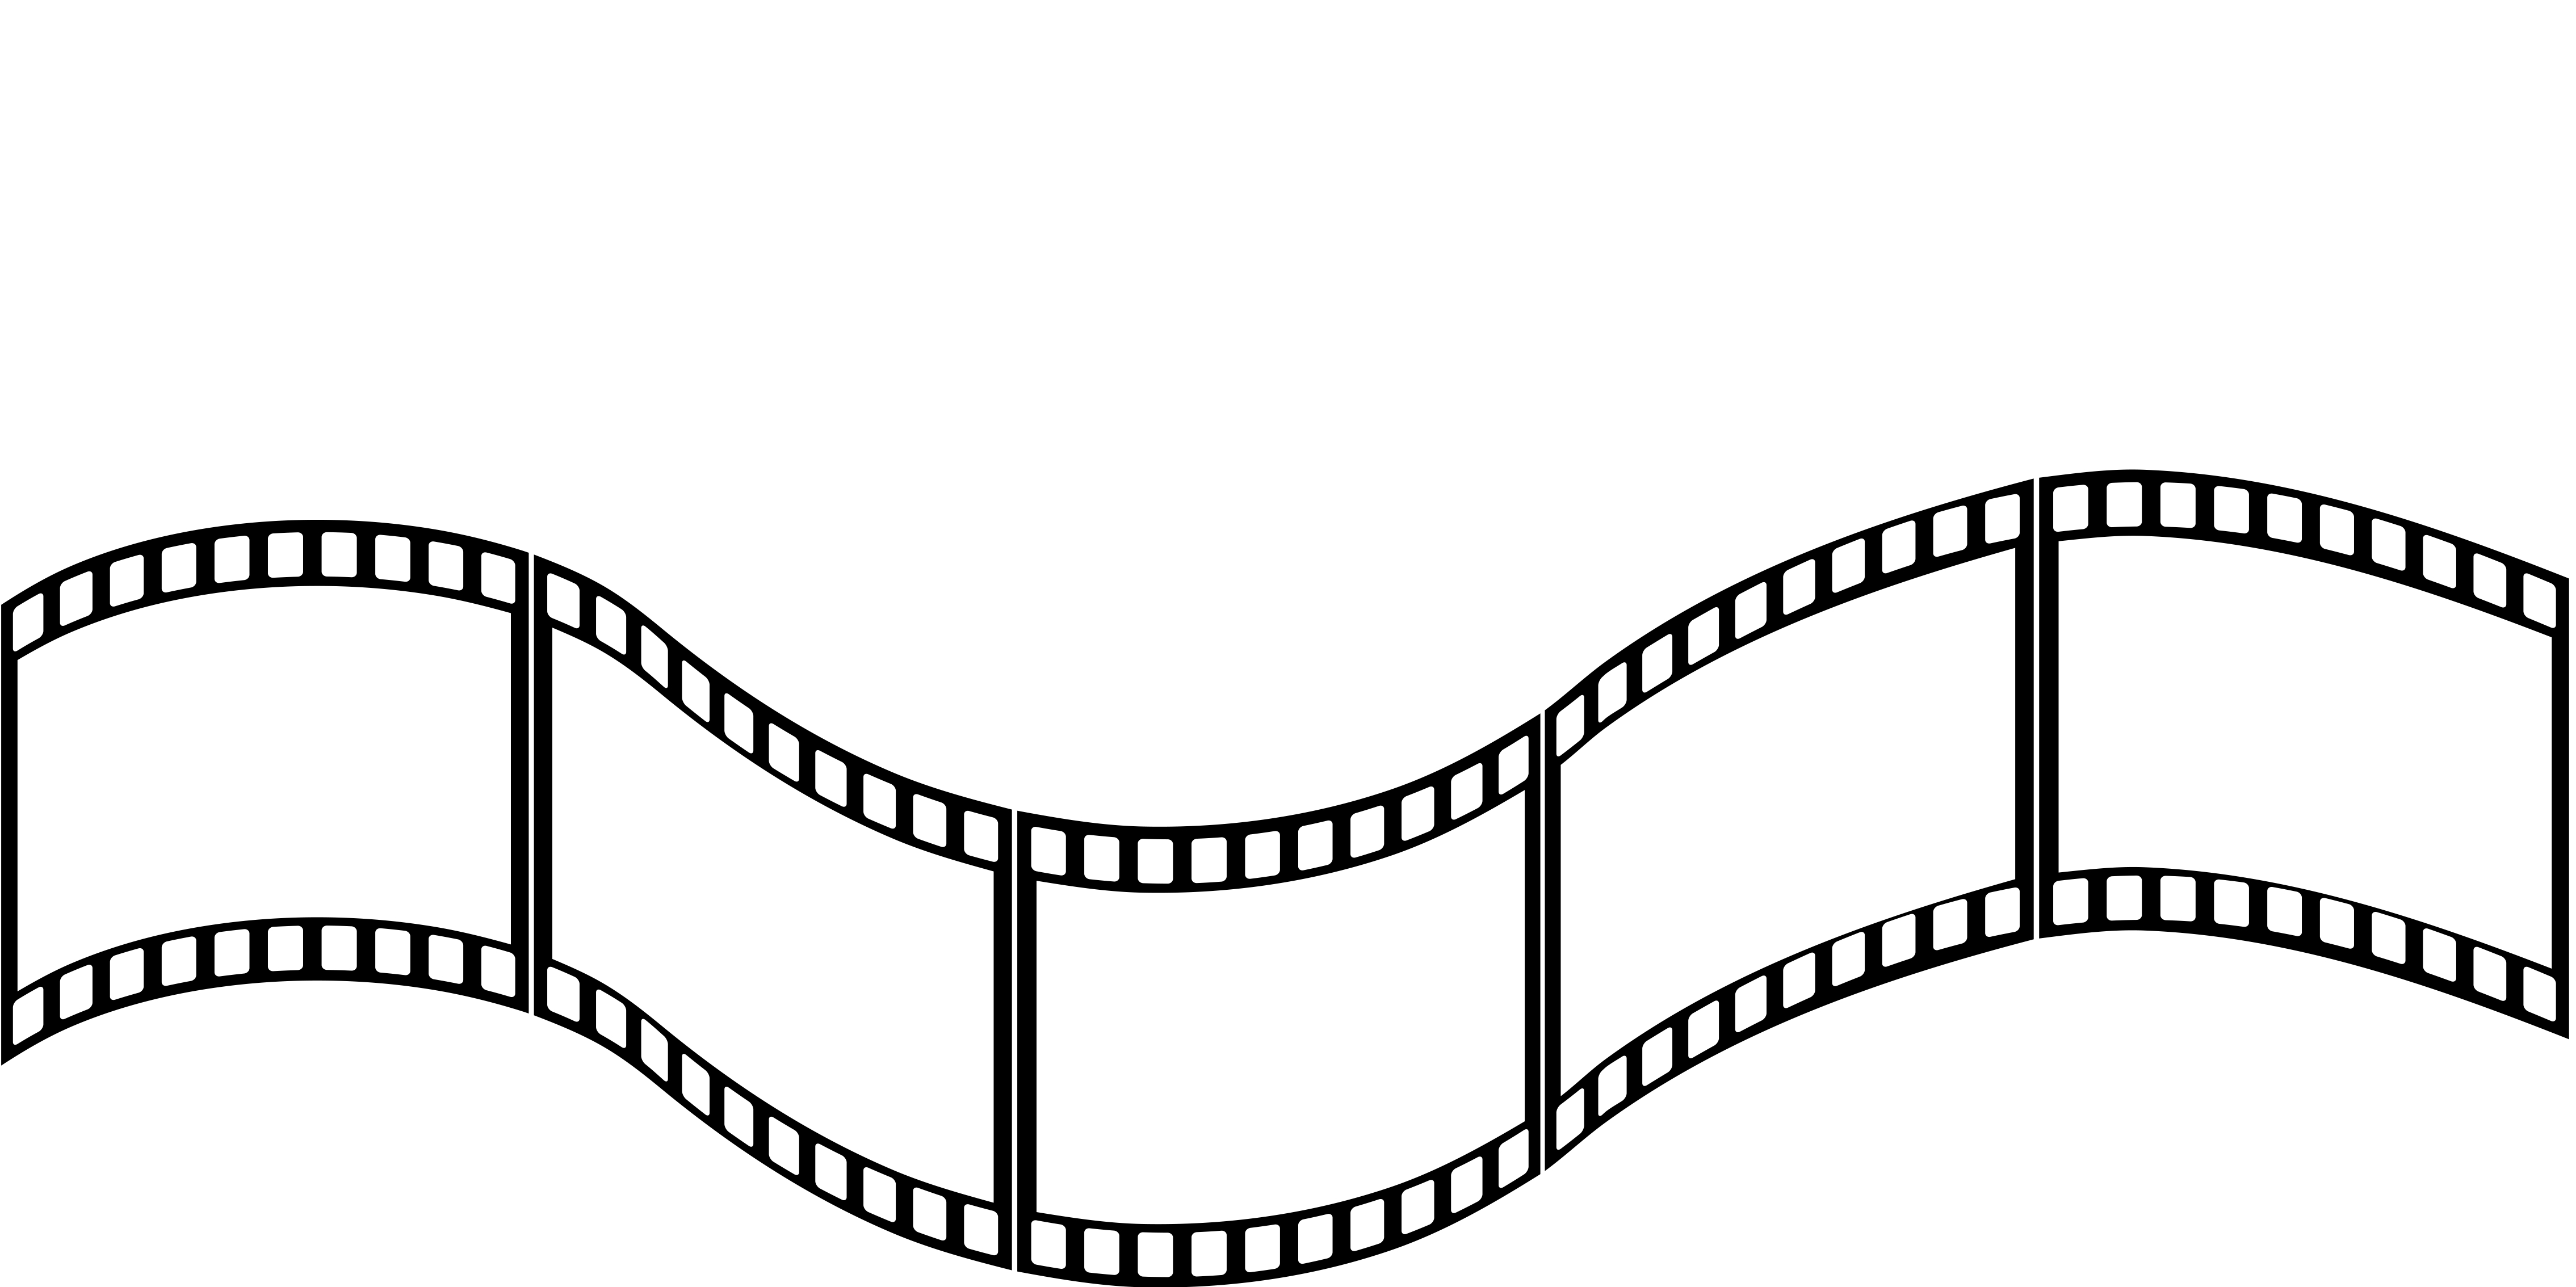 37 Film Reel Png Free Cliparts That You Can Download To You Computer